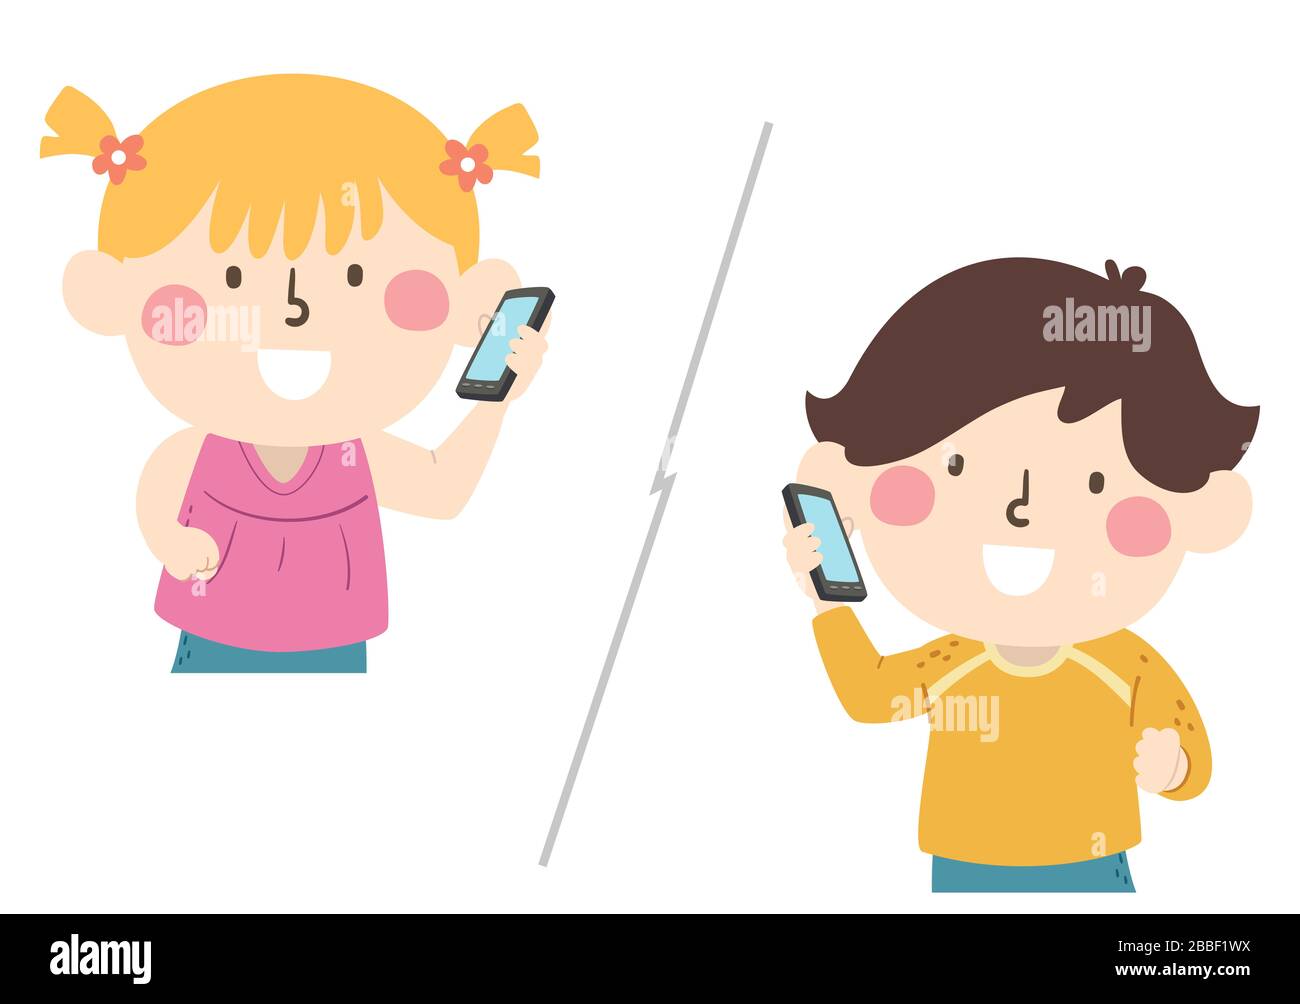 talking on the mobile phone clipart